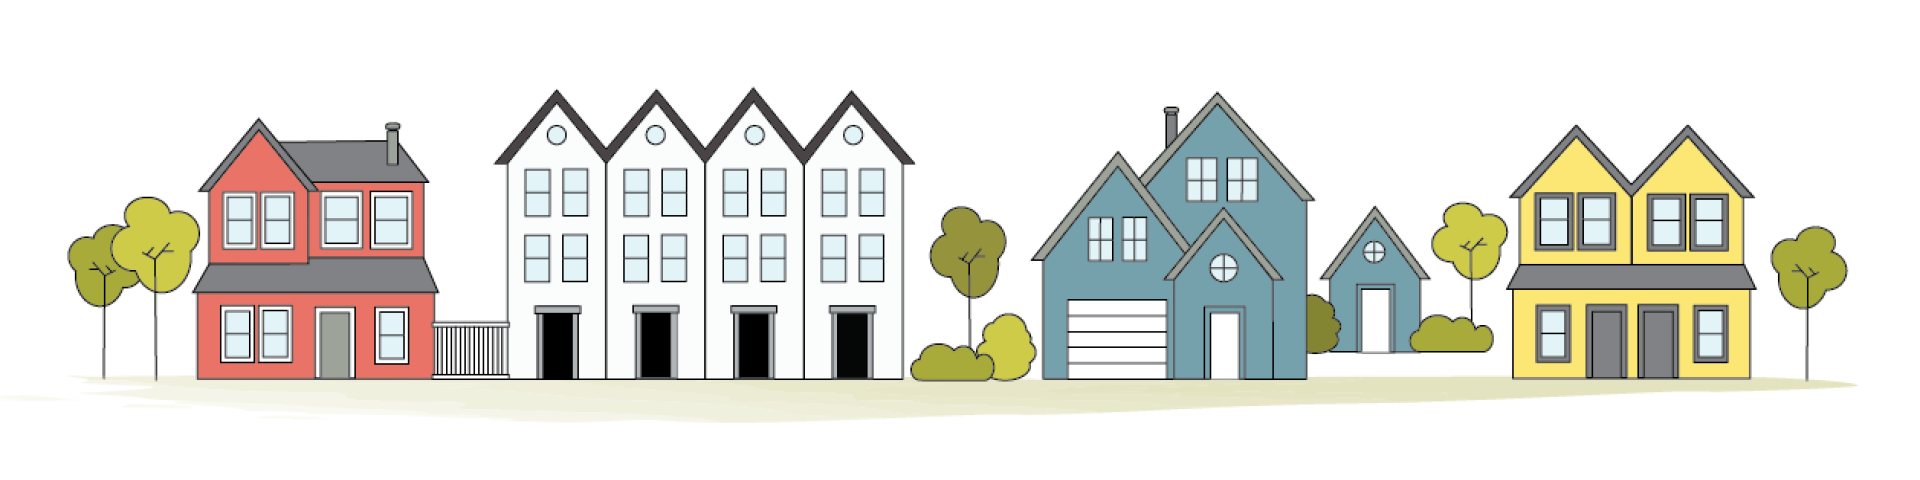 Image with graphics of different housing types